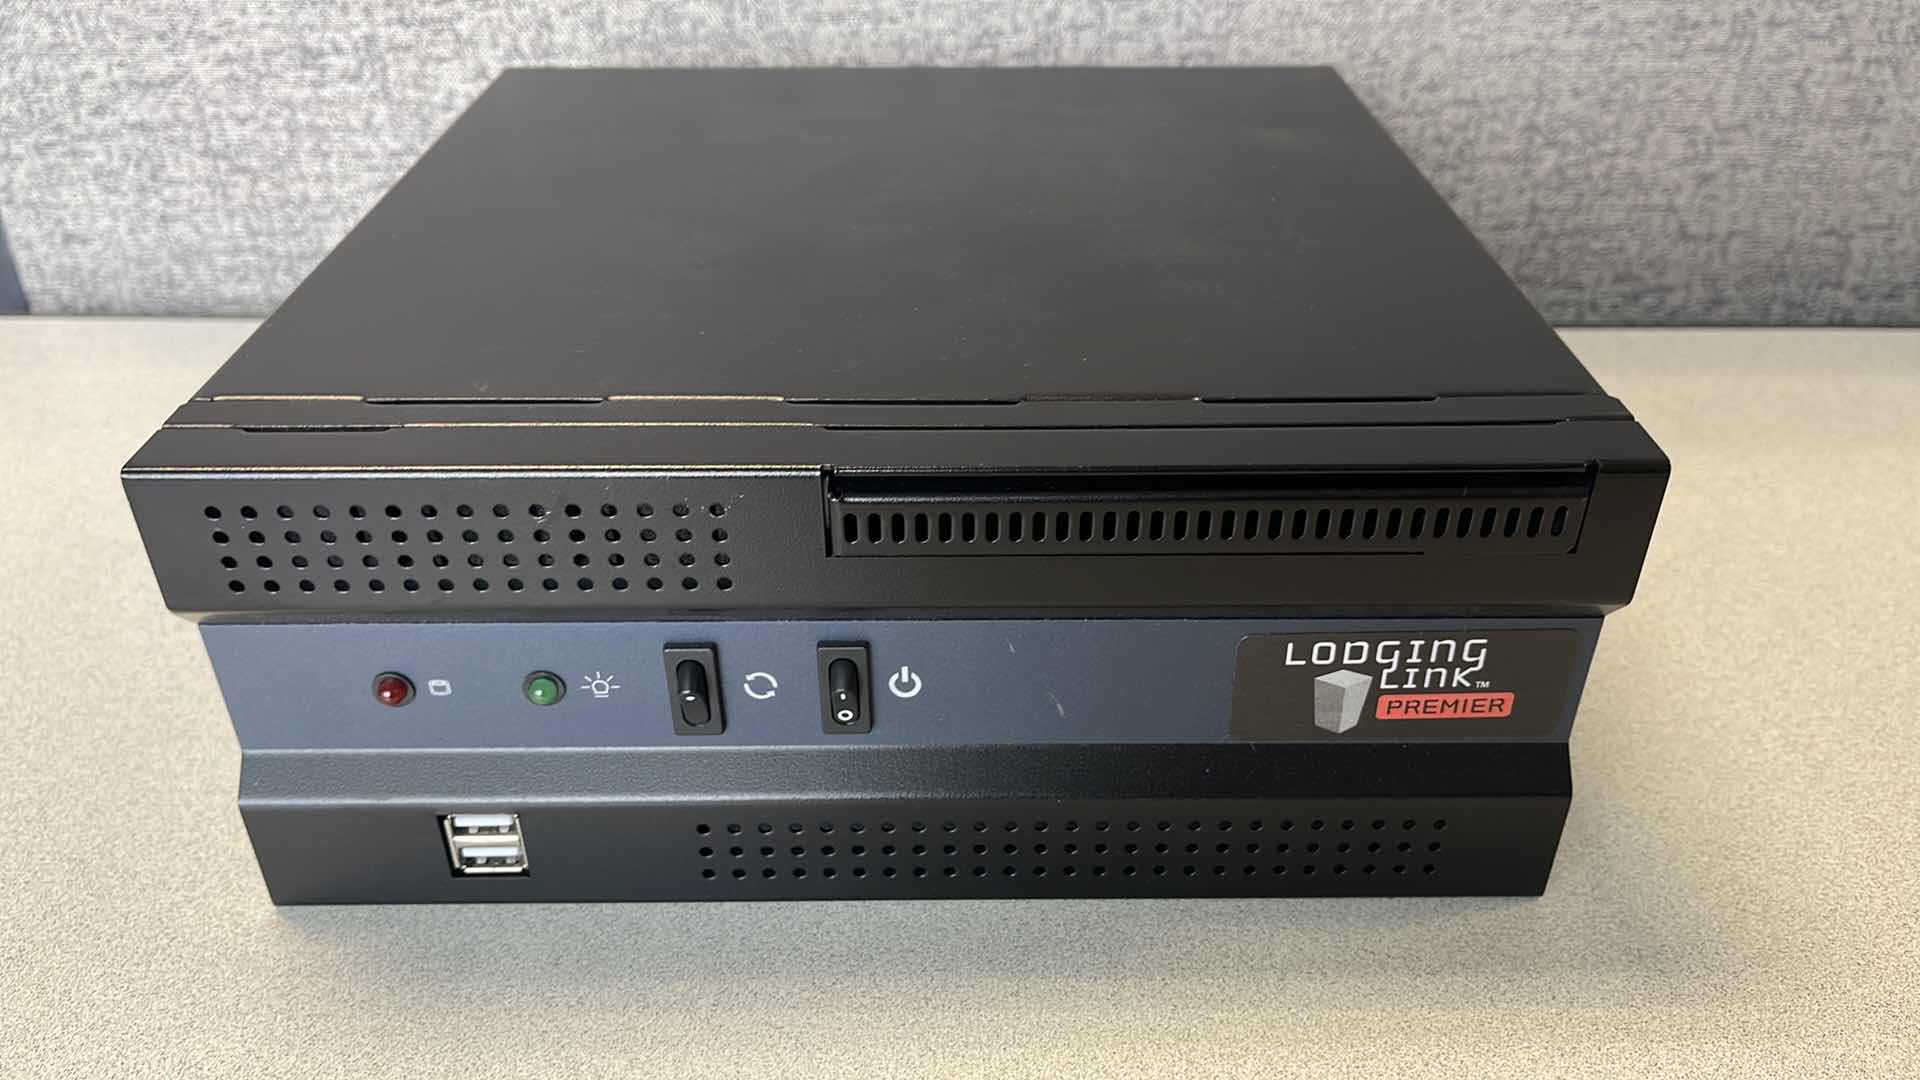 Photo 1 of LODGING LINK PREMIER DB9 8P PROPERTY MANAGEMENT CONNECTION SYSTEM